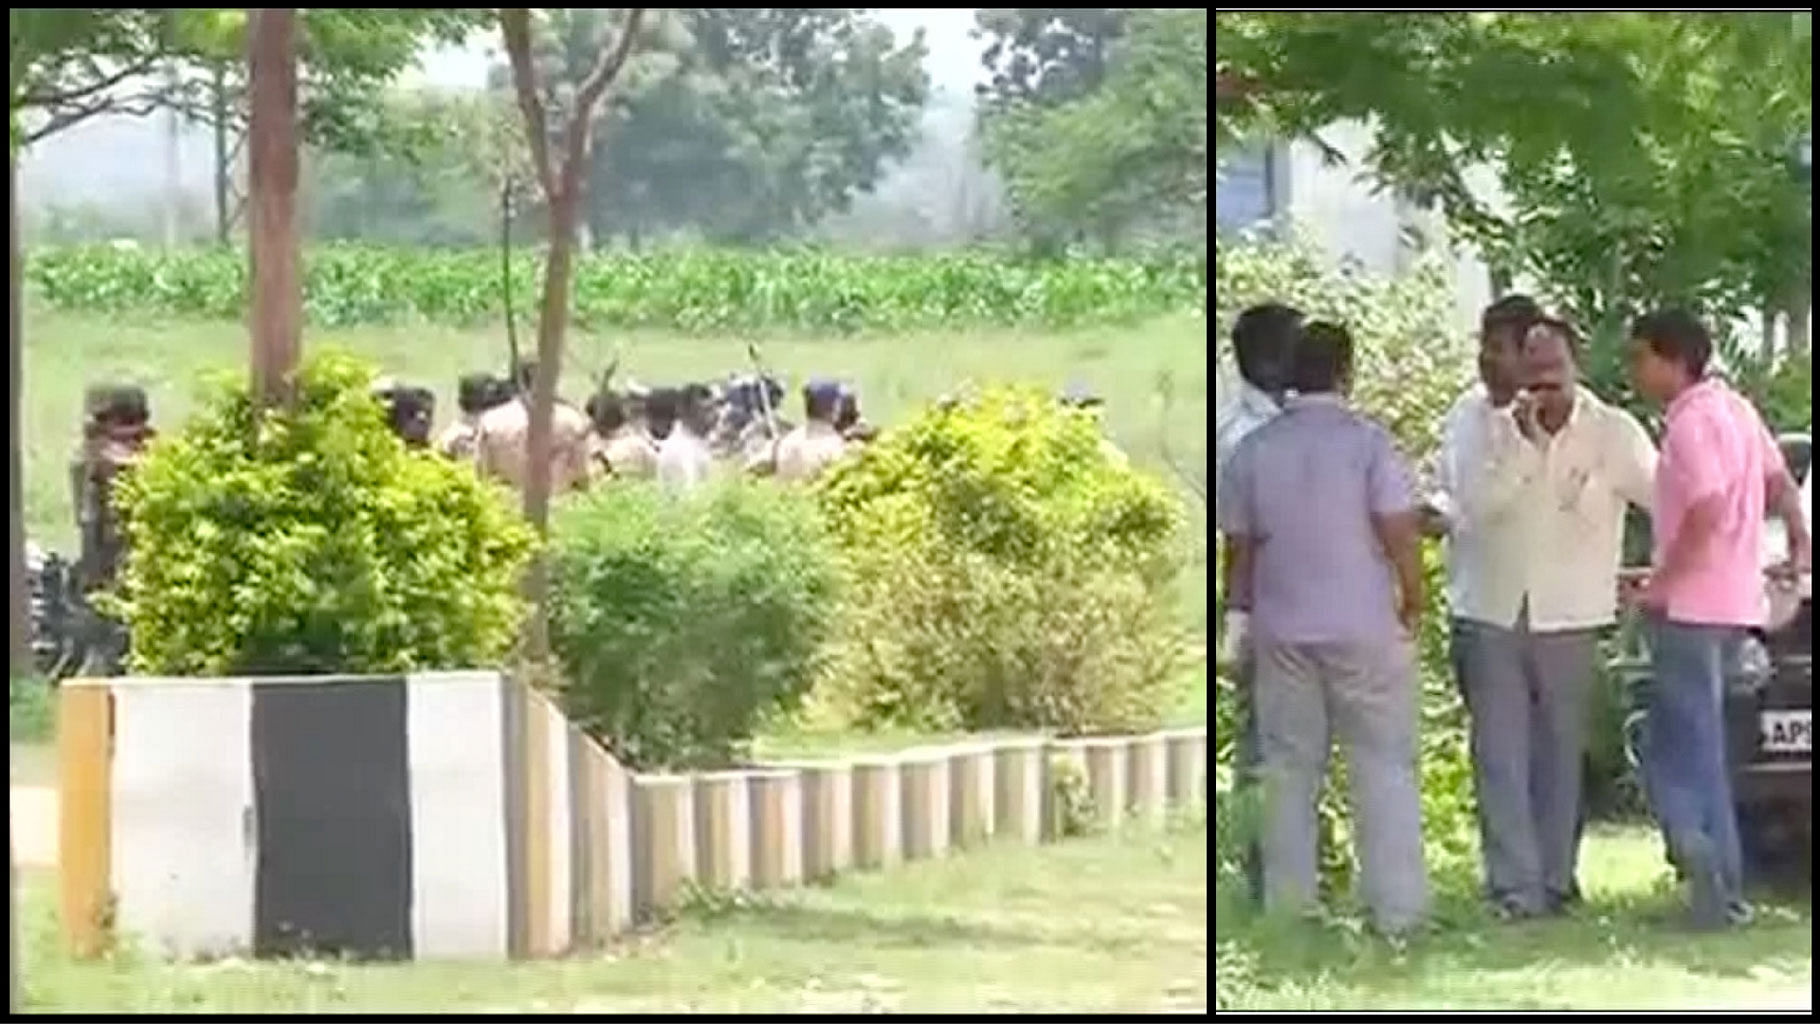 Telangana police officials during the encounter in Shadnagar on Monday, 8 August 2016. (Photo Courtesy: ANI/altered by <b>The Quint</b>)